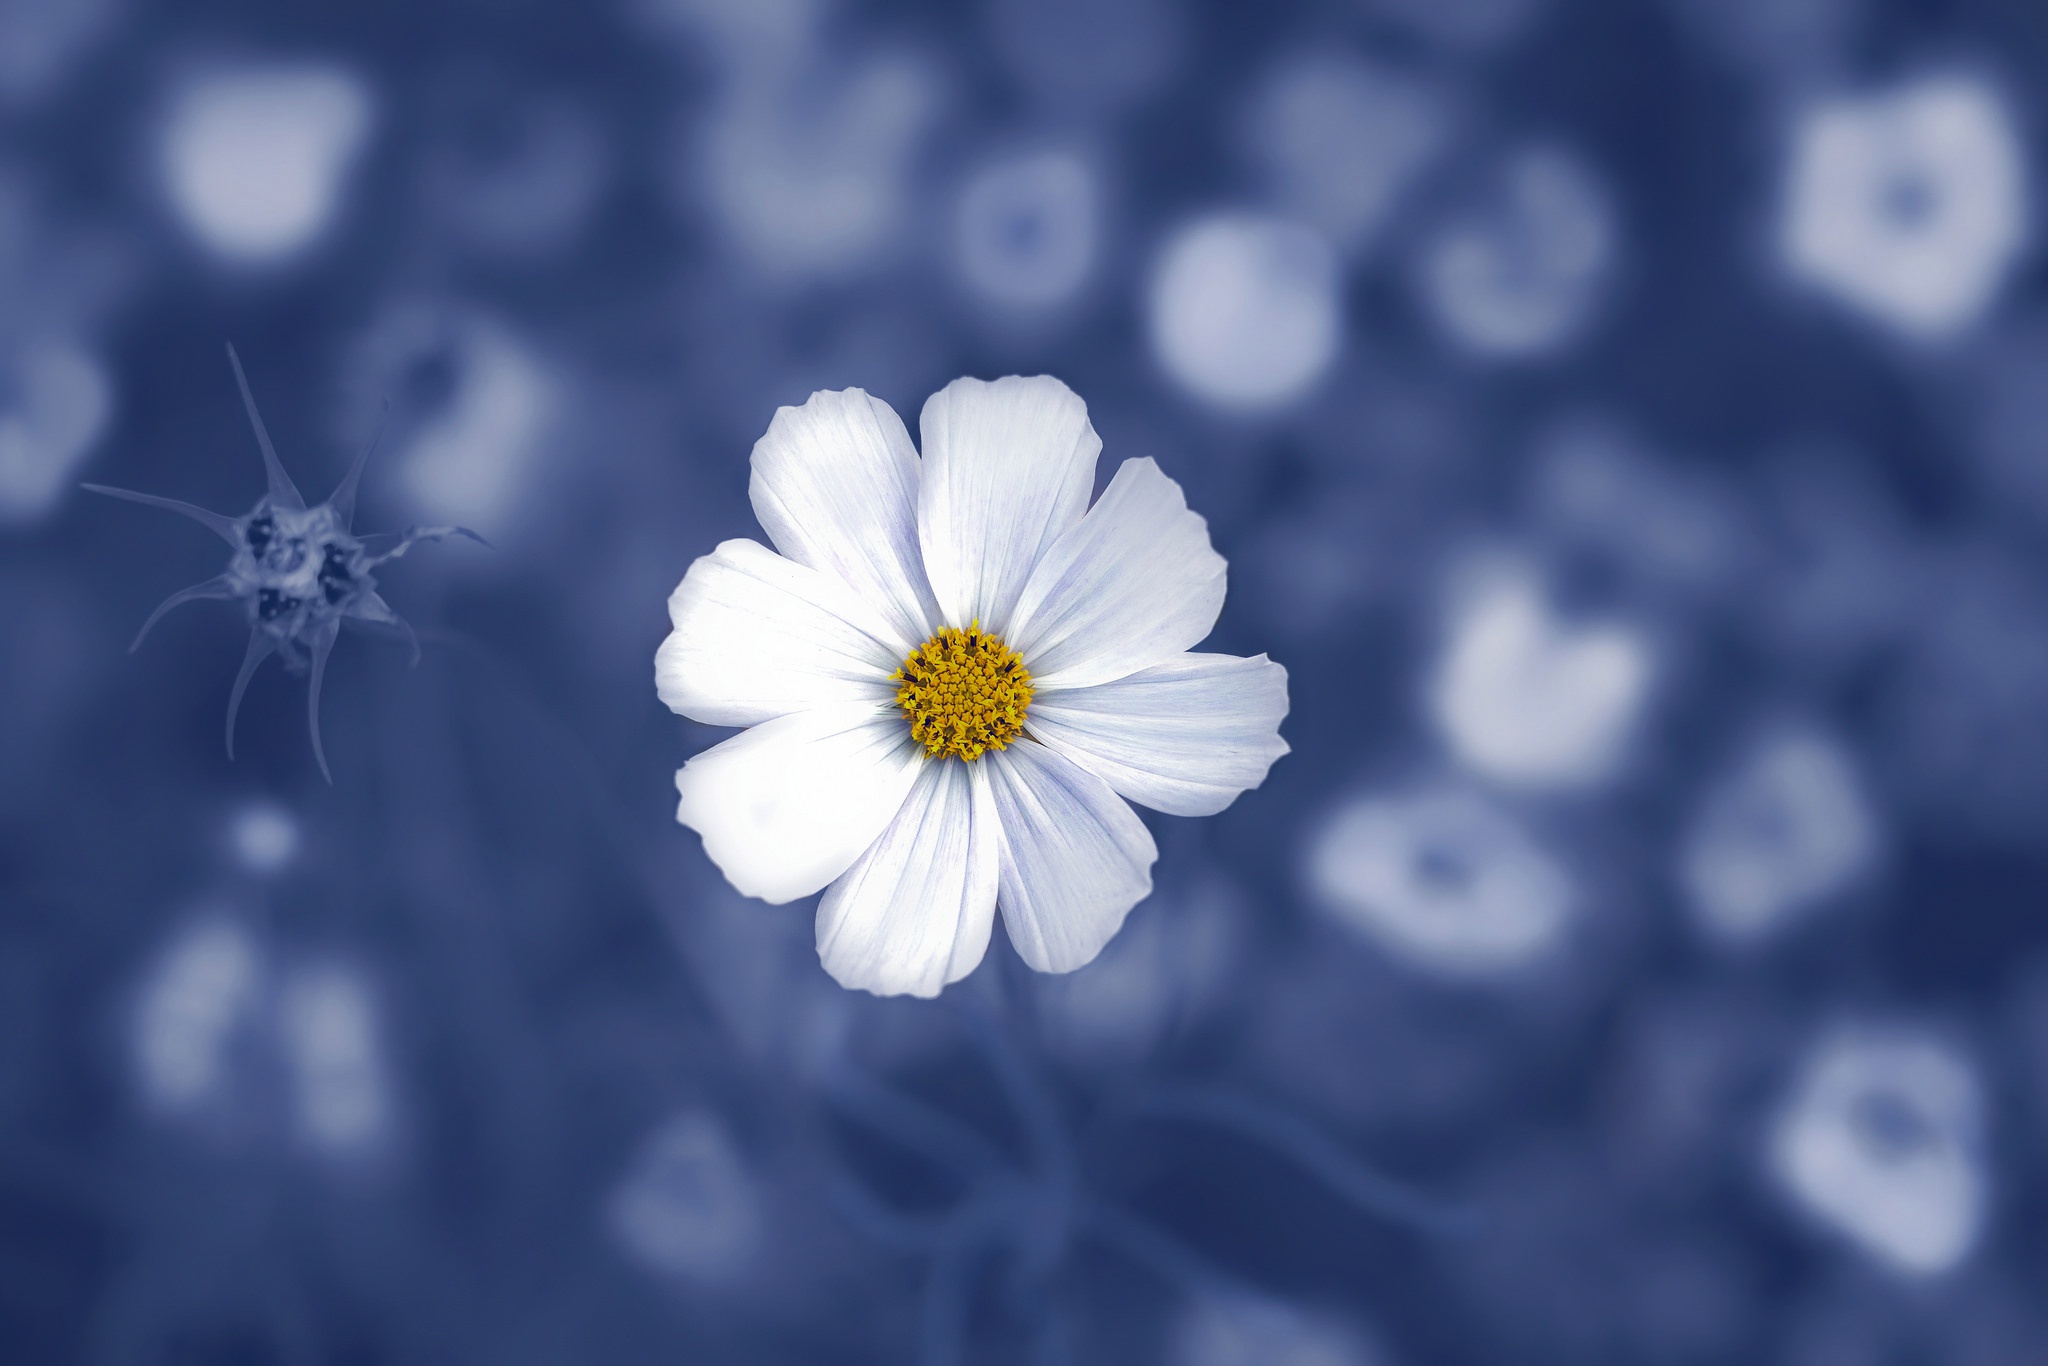 General 2048x1366 blue white flowers plants white flowers blurred blurry background macro